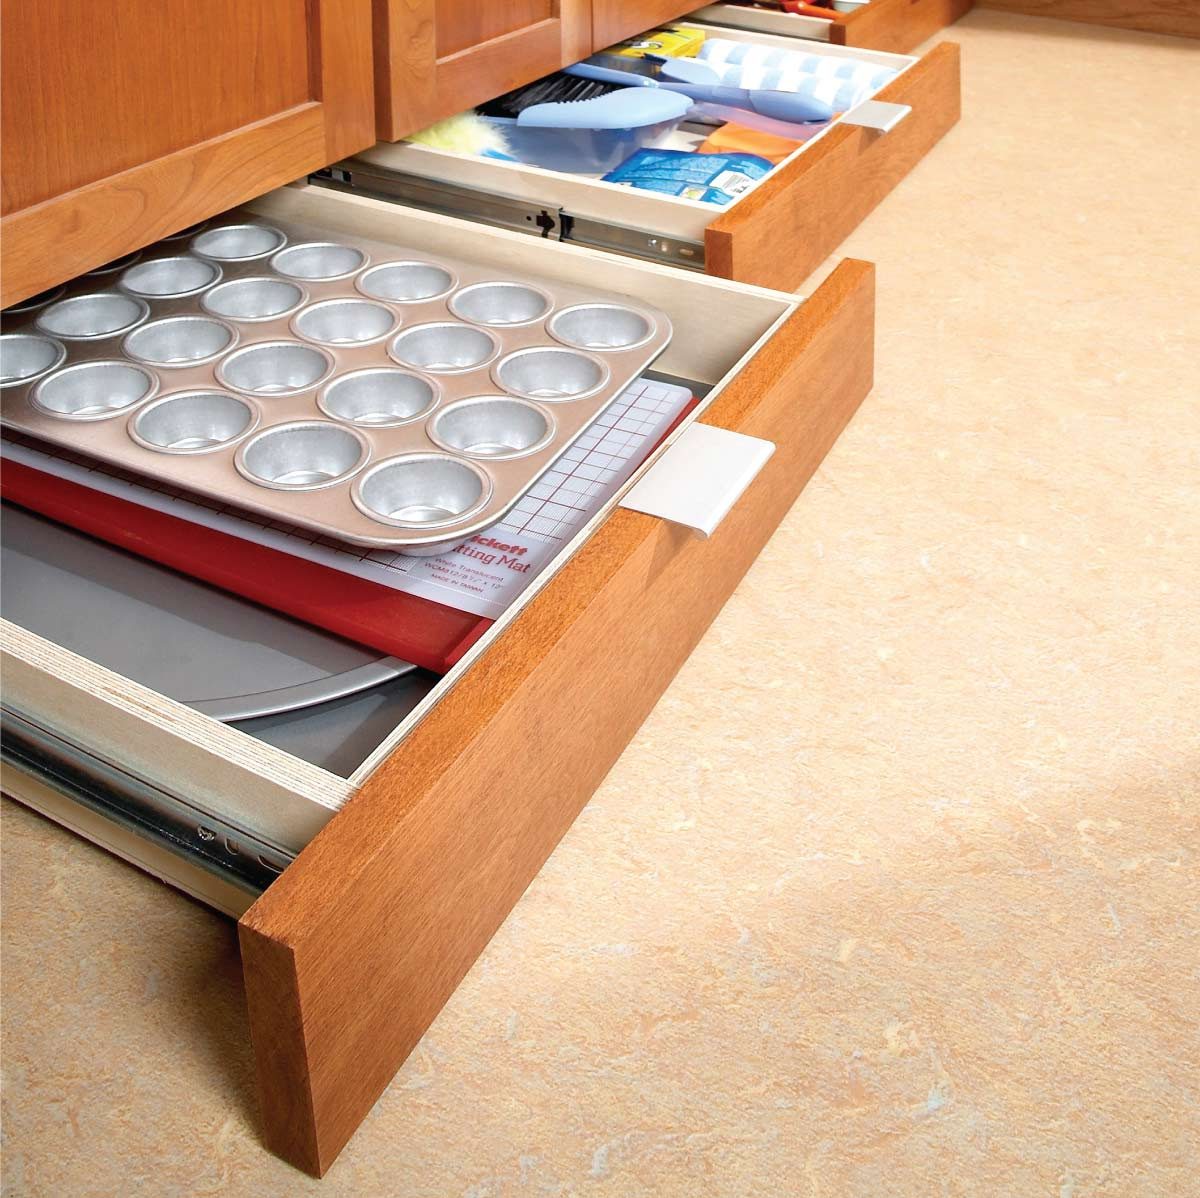 How To Build Under Cabinet Drawers Increase Kitchen Storage DIY Family Handyman